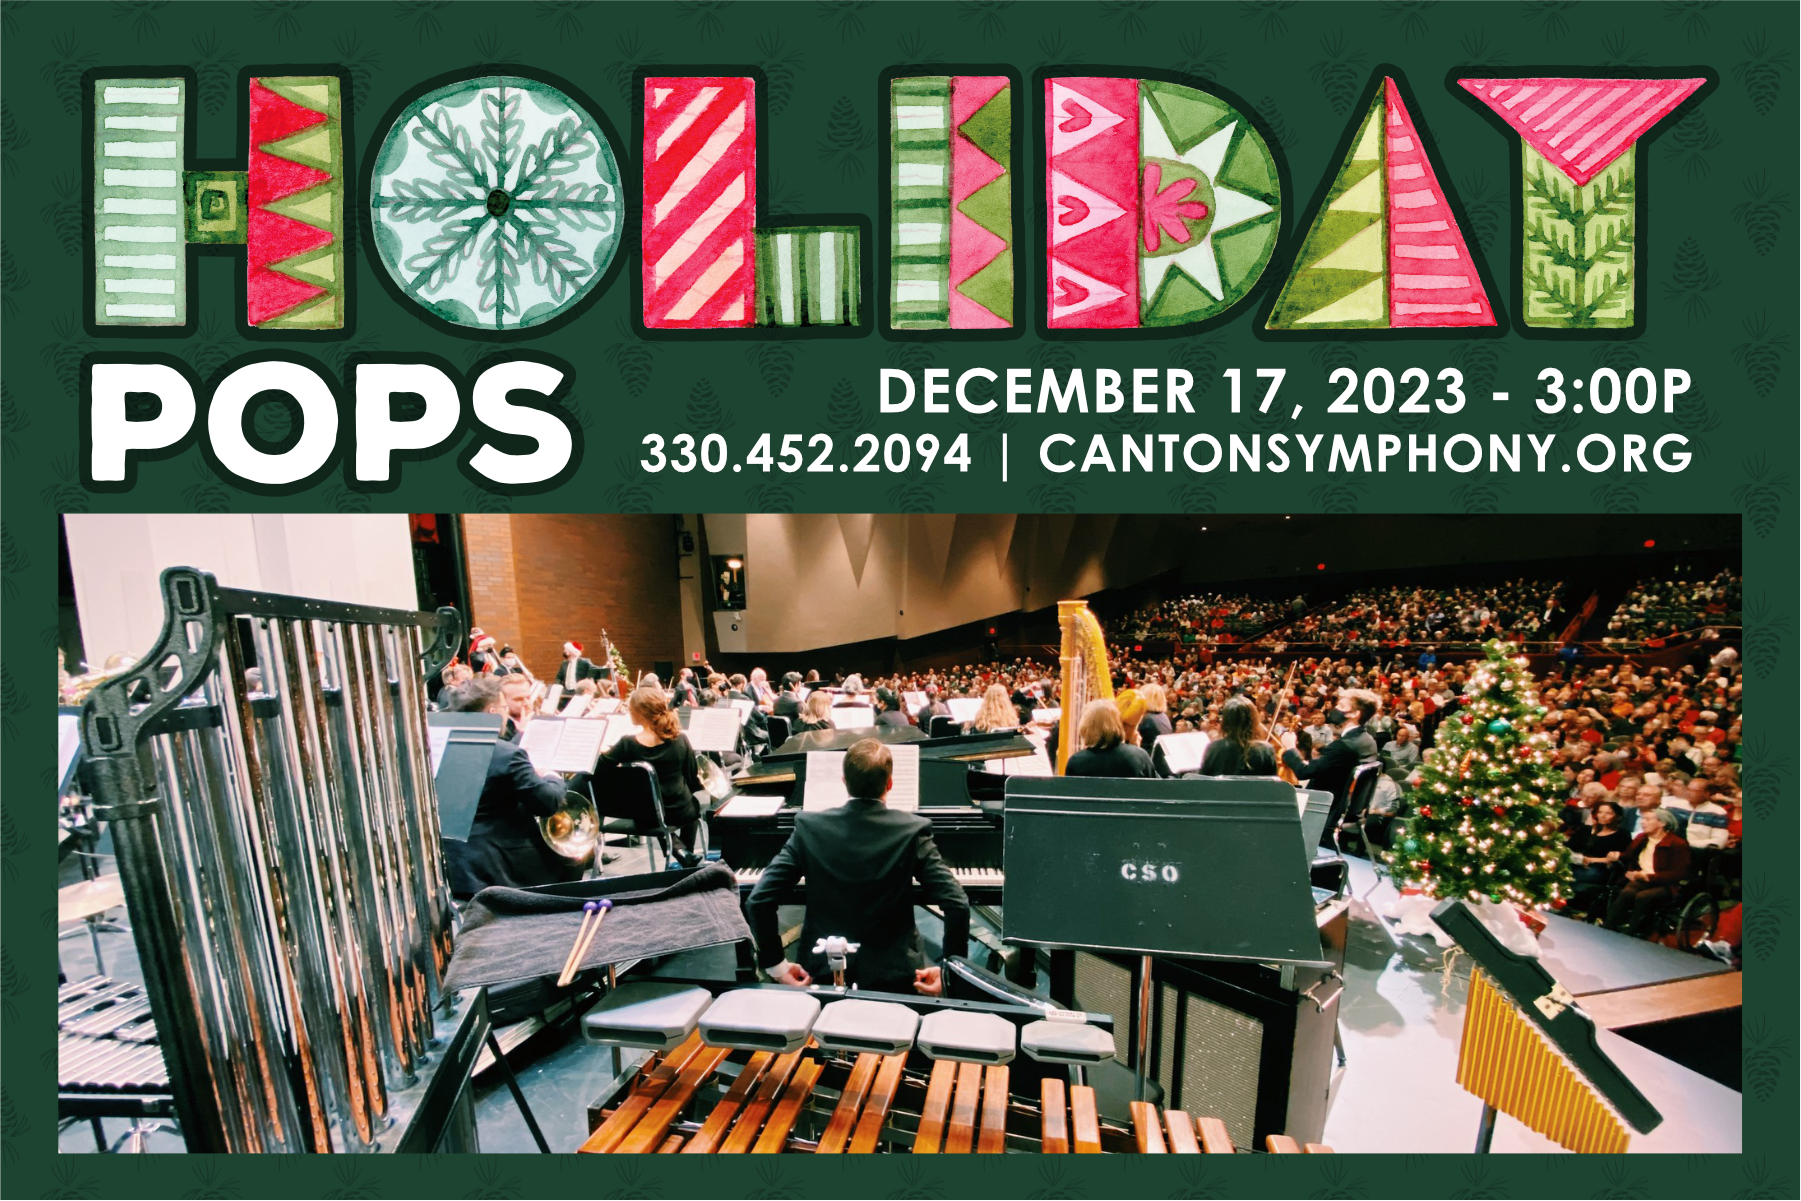 A whimsical graphic that features an image of the Canton Symphony Orchestra on stage with Christmas decorations. It is for the Holiday Pops concert.